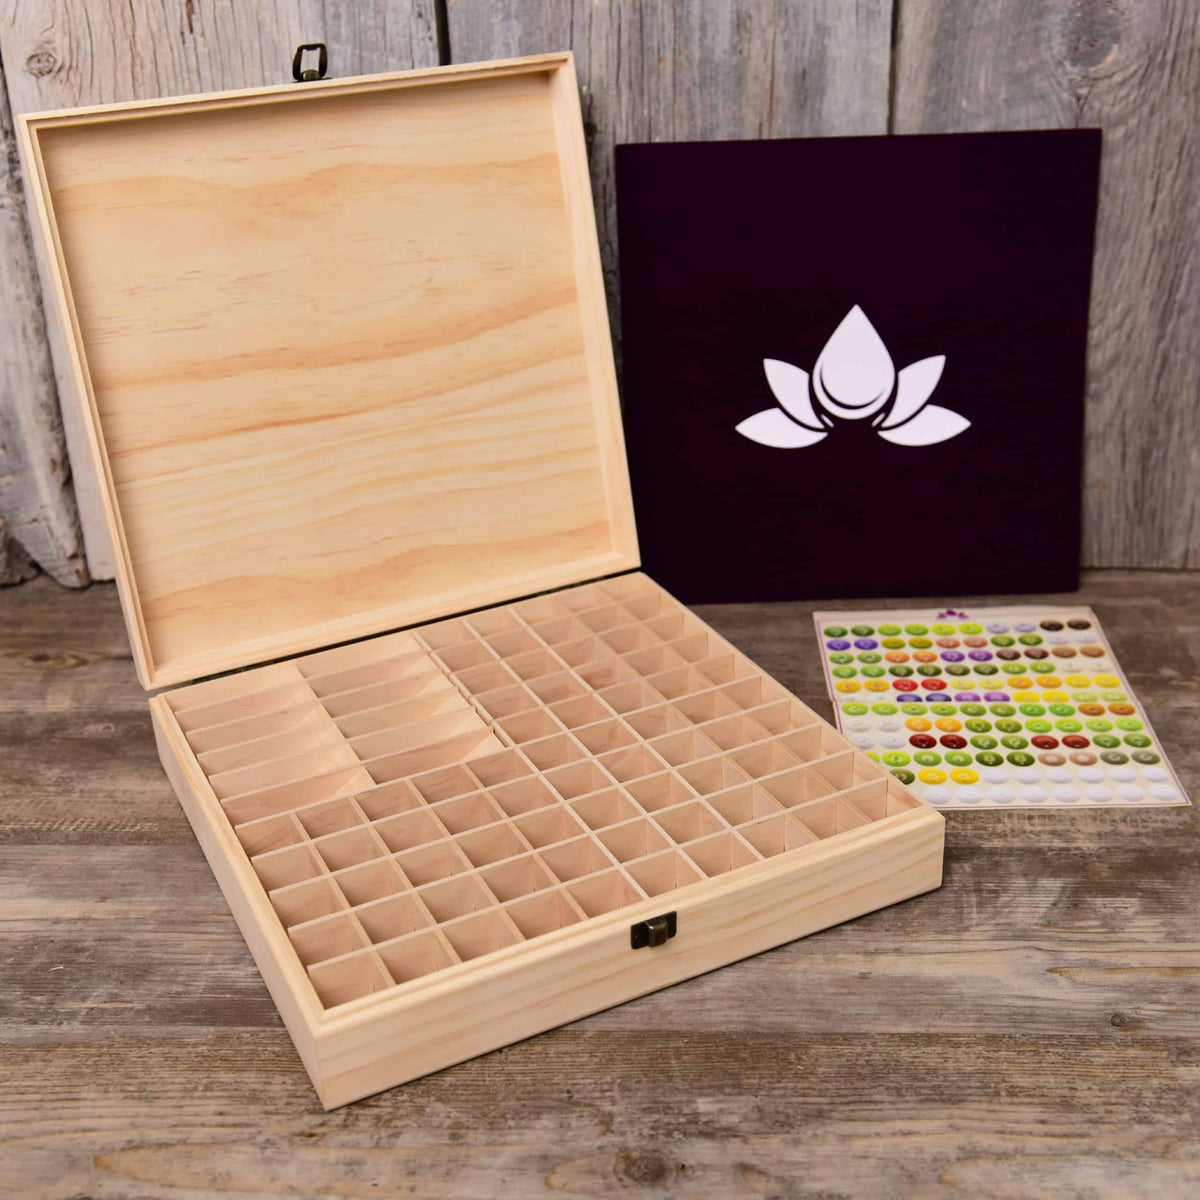 Bamboo Essential Oil Wooden Storage Box - Buy Online Or Call (970